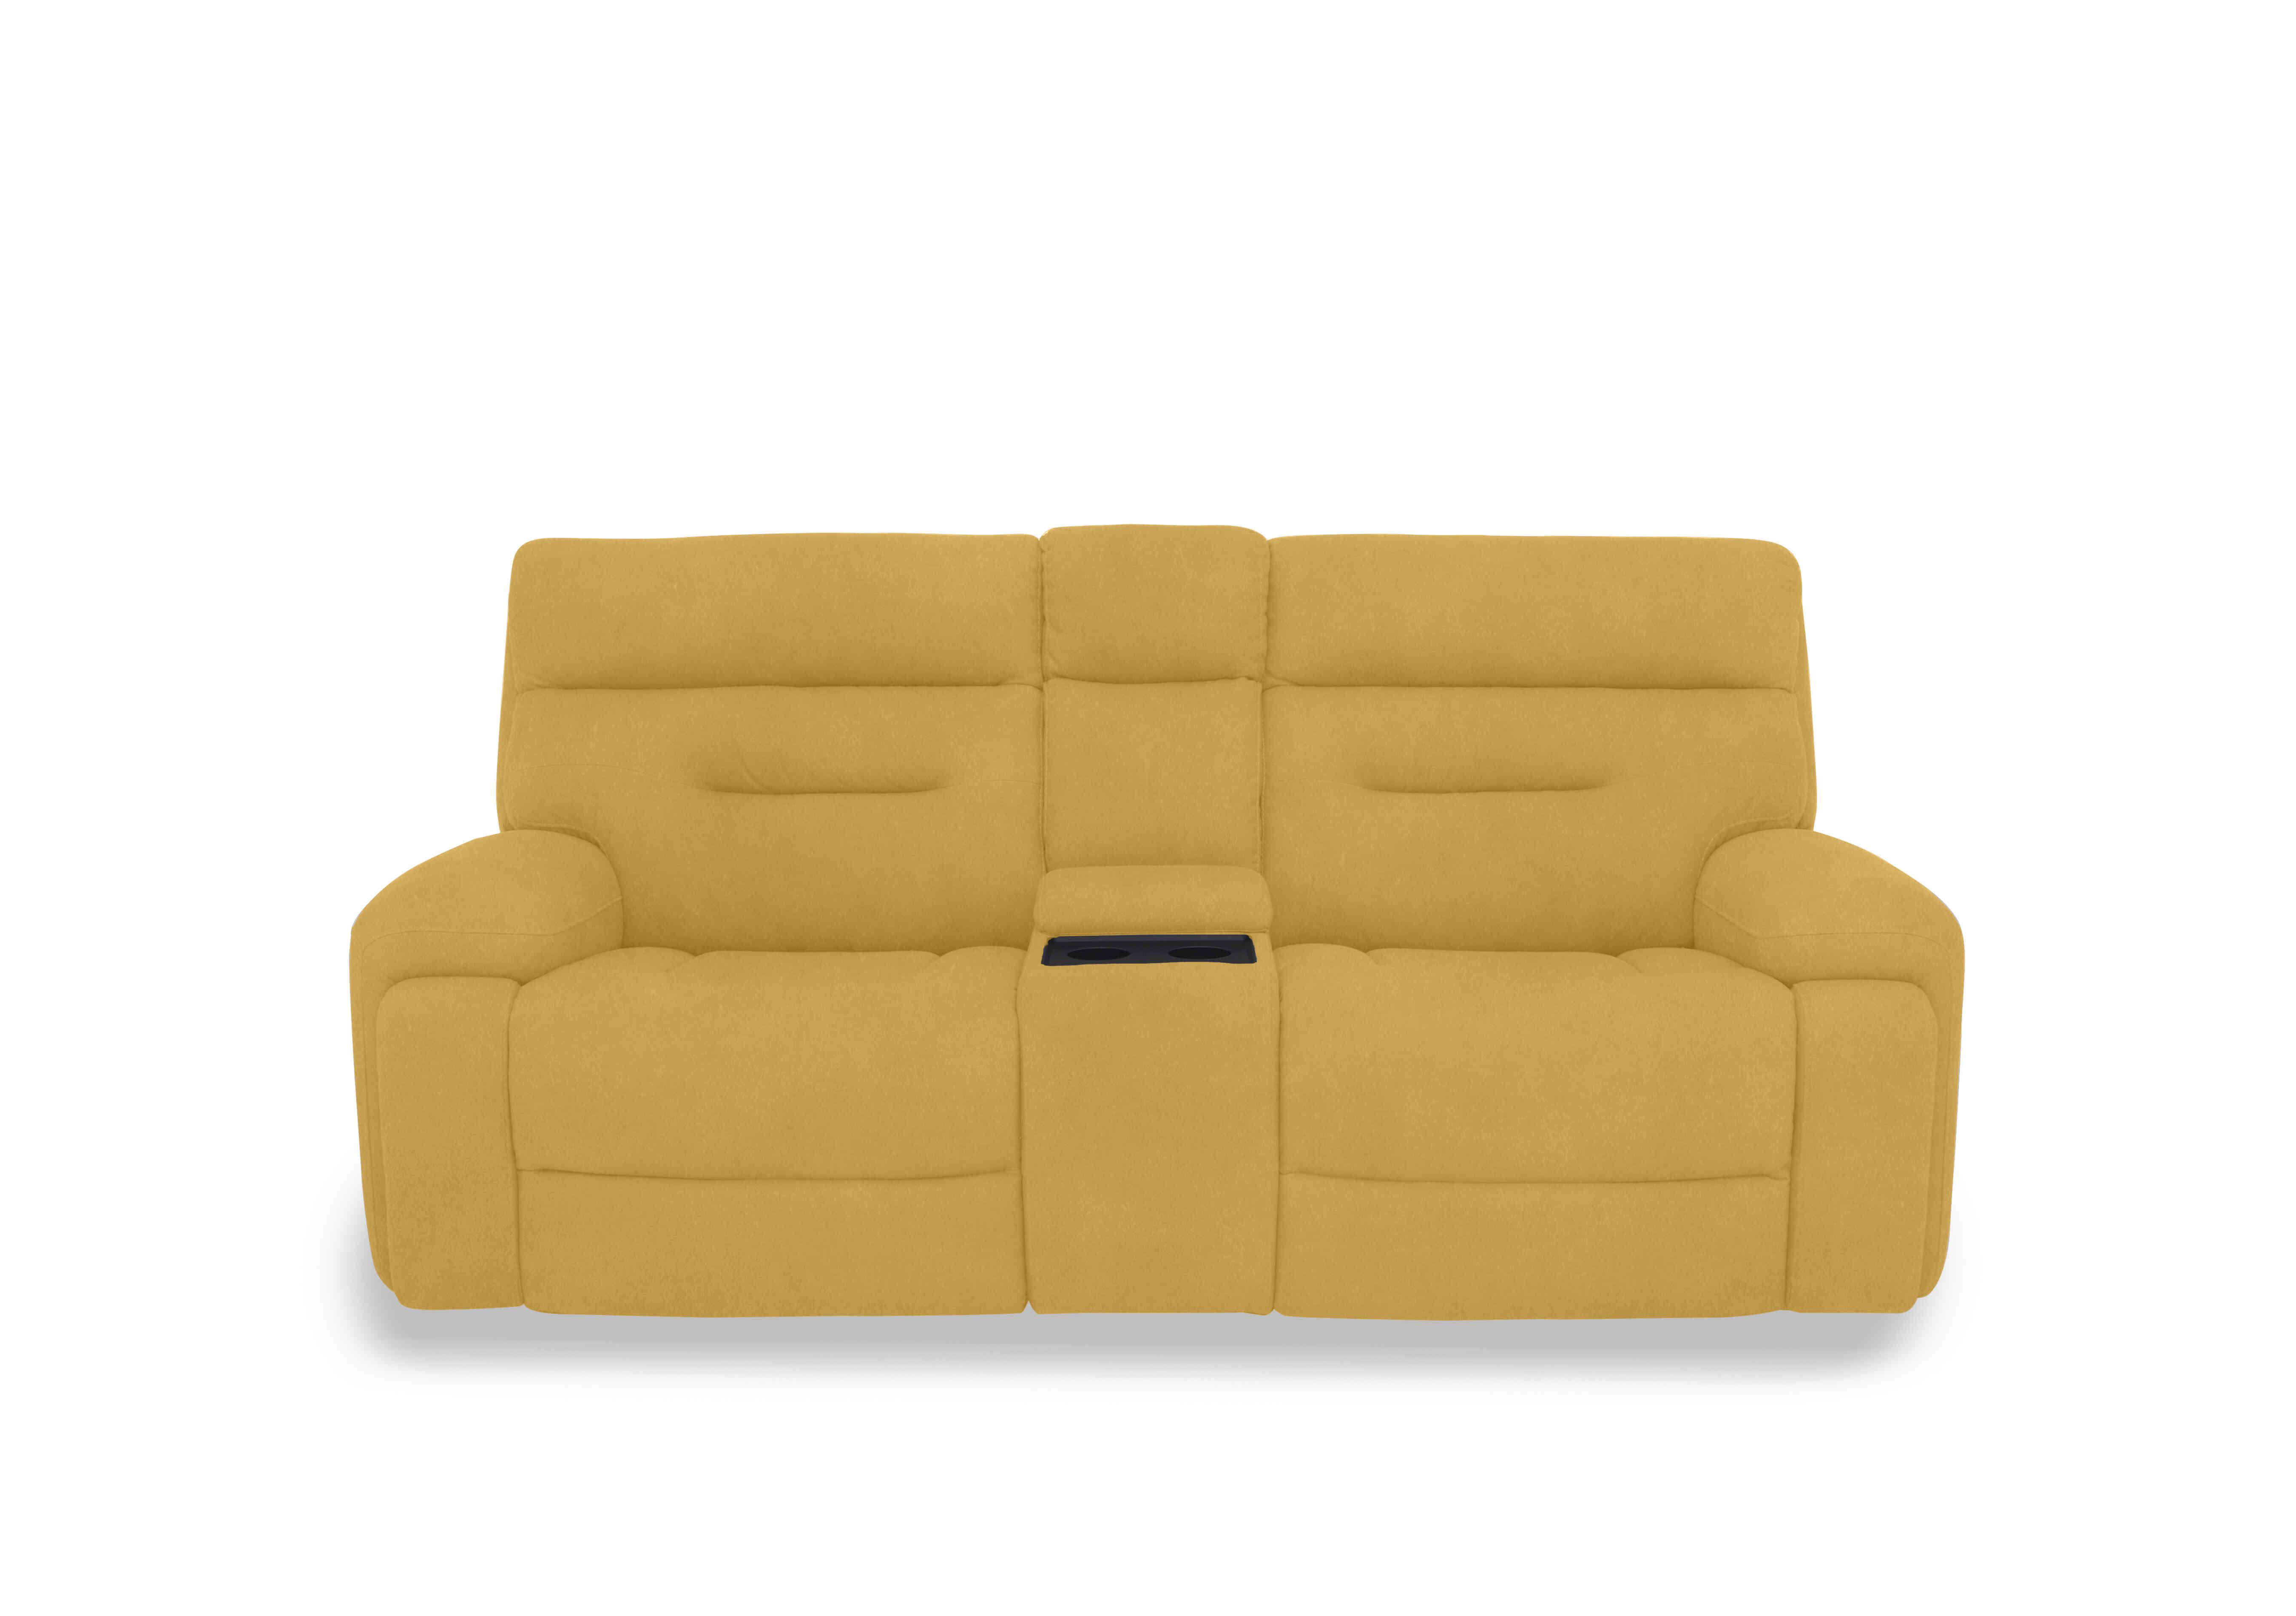 Cinemax Media 3 Seater Fabric Power Recliner Sofa with Power Headrests in Vv-0310 Velvet Giallo on Furniture Village